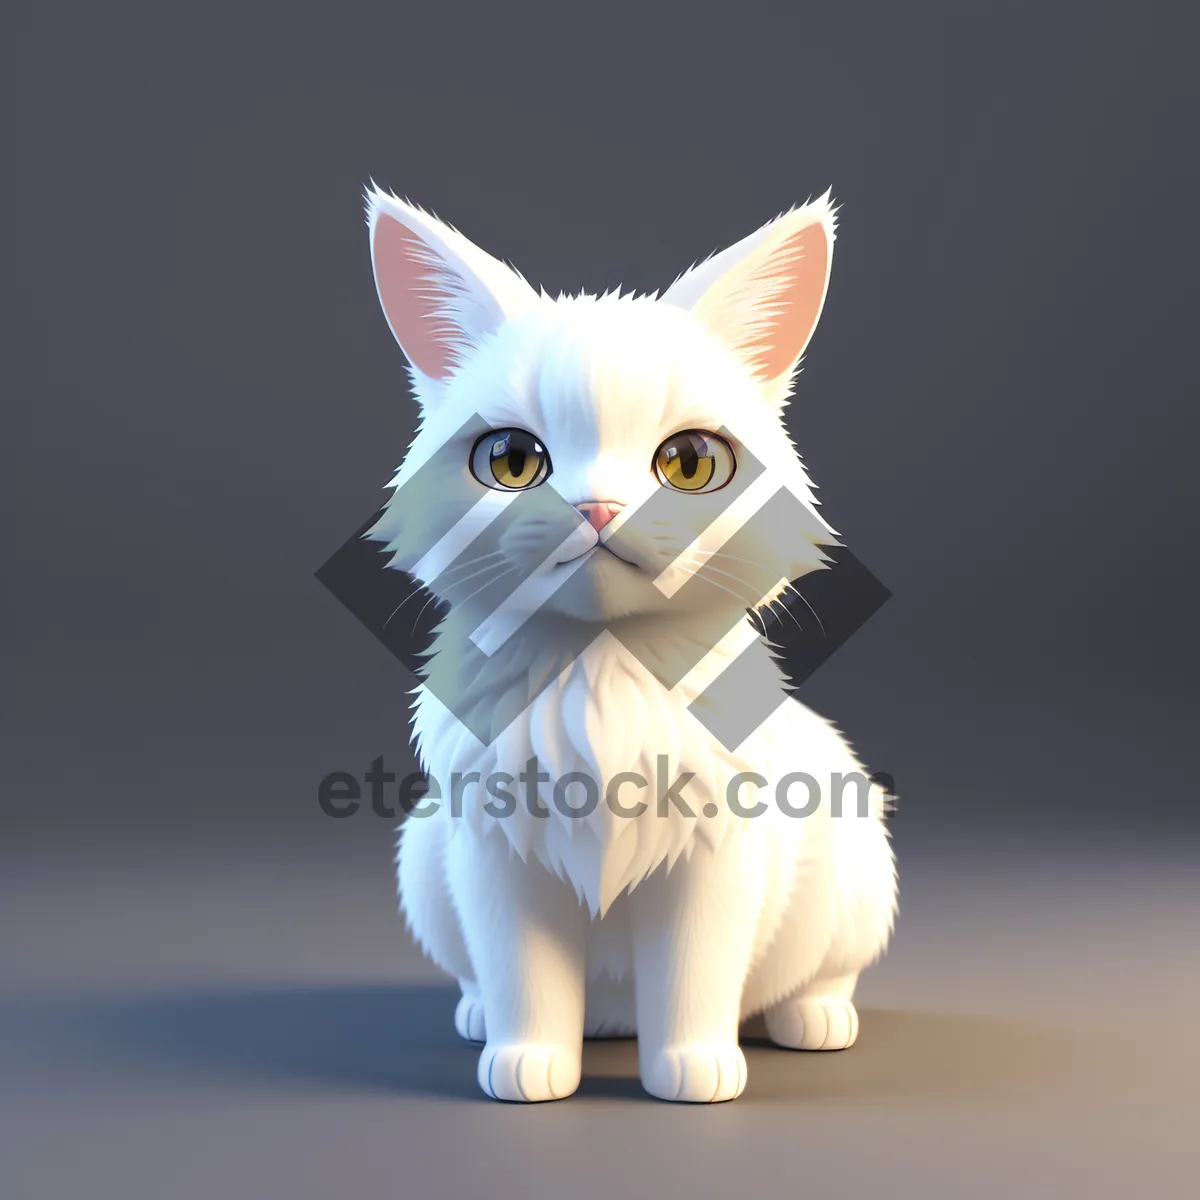 Picture of Fluffy White Kitty with Curious Eyes